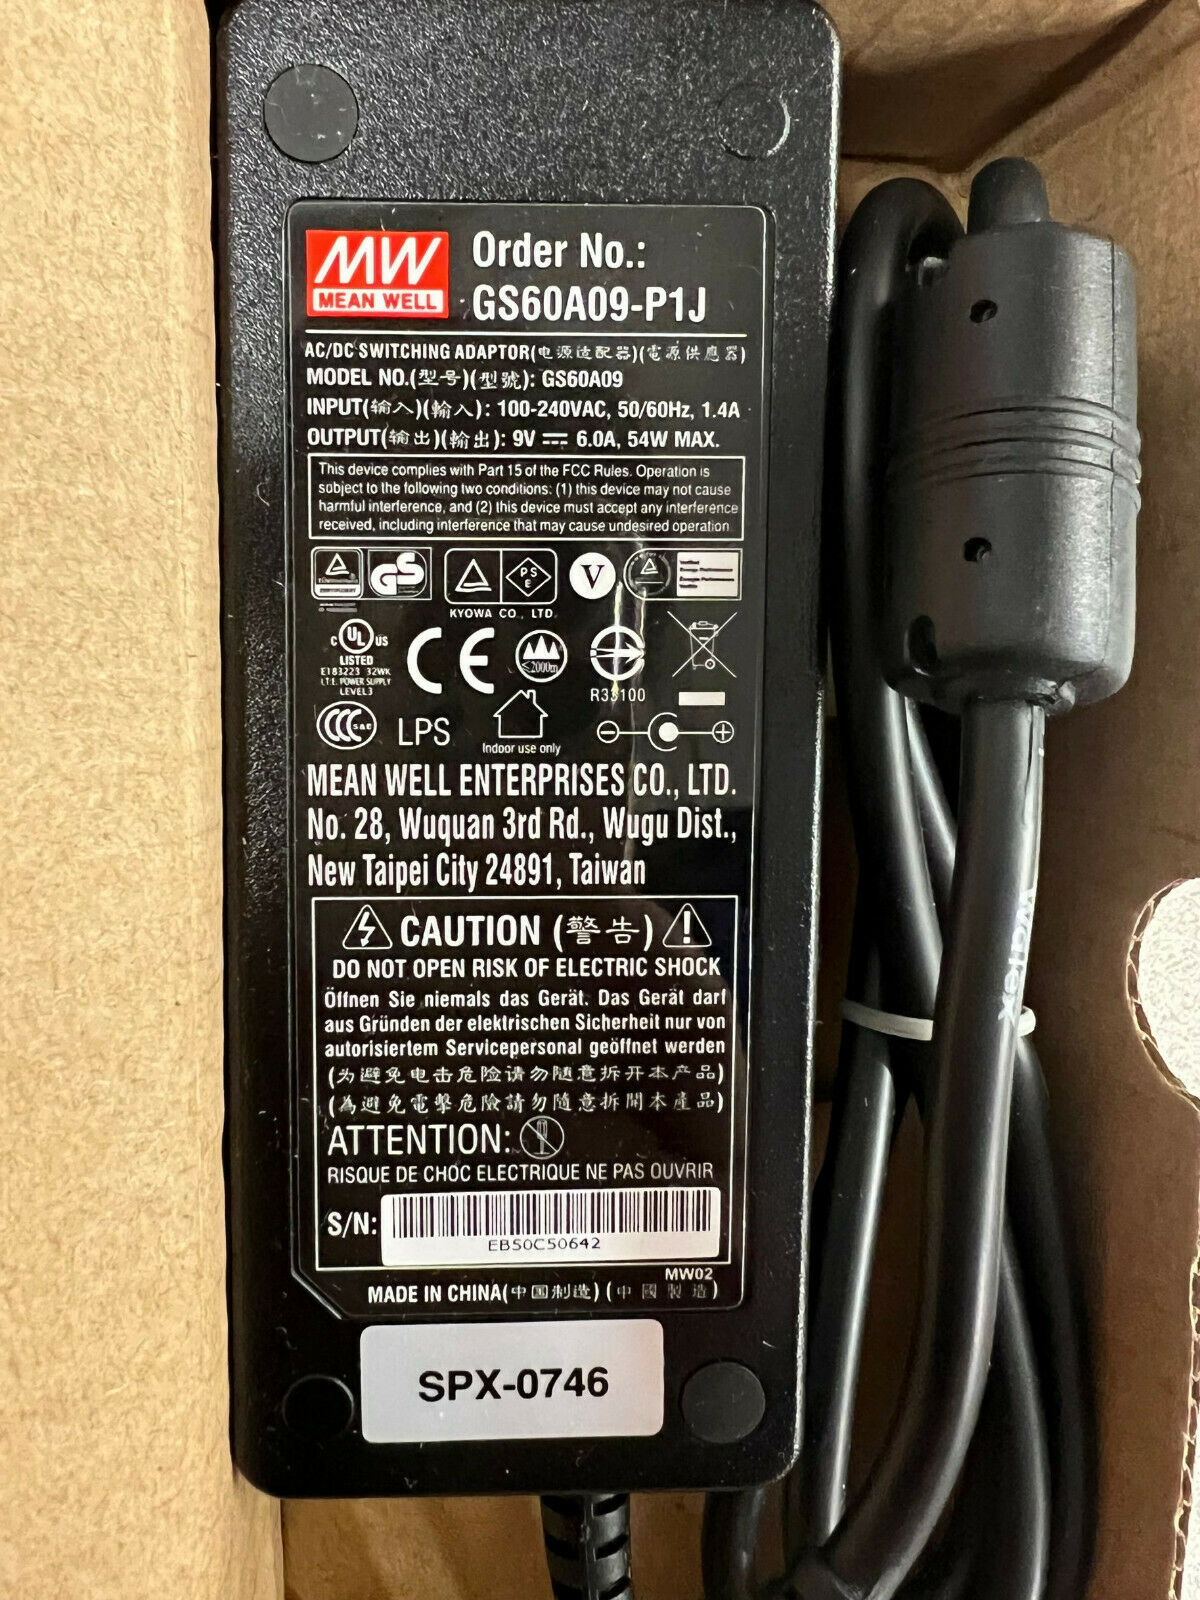 Original MW Mean Well GS60A09-P1J 9V 6A 54W AC Adapter Power Supply Cord Charger